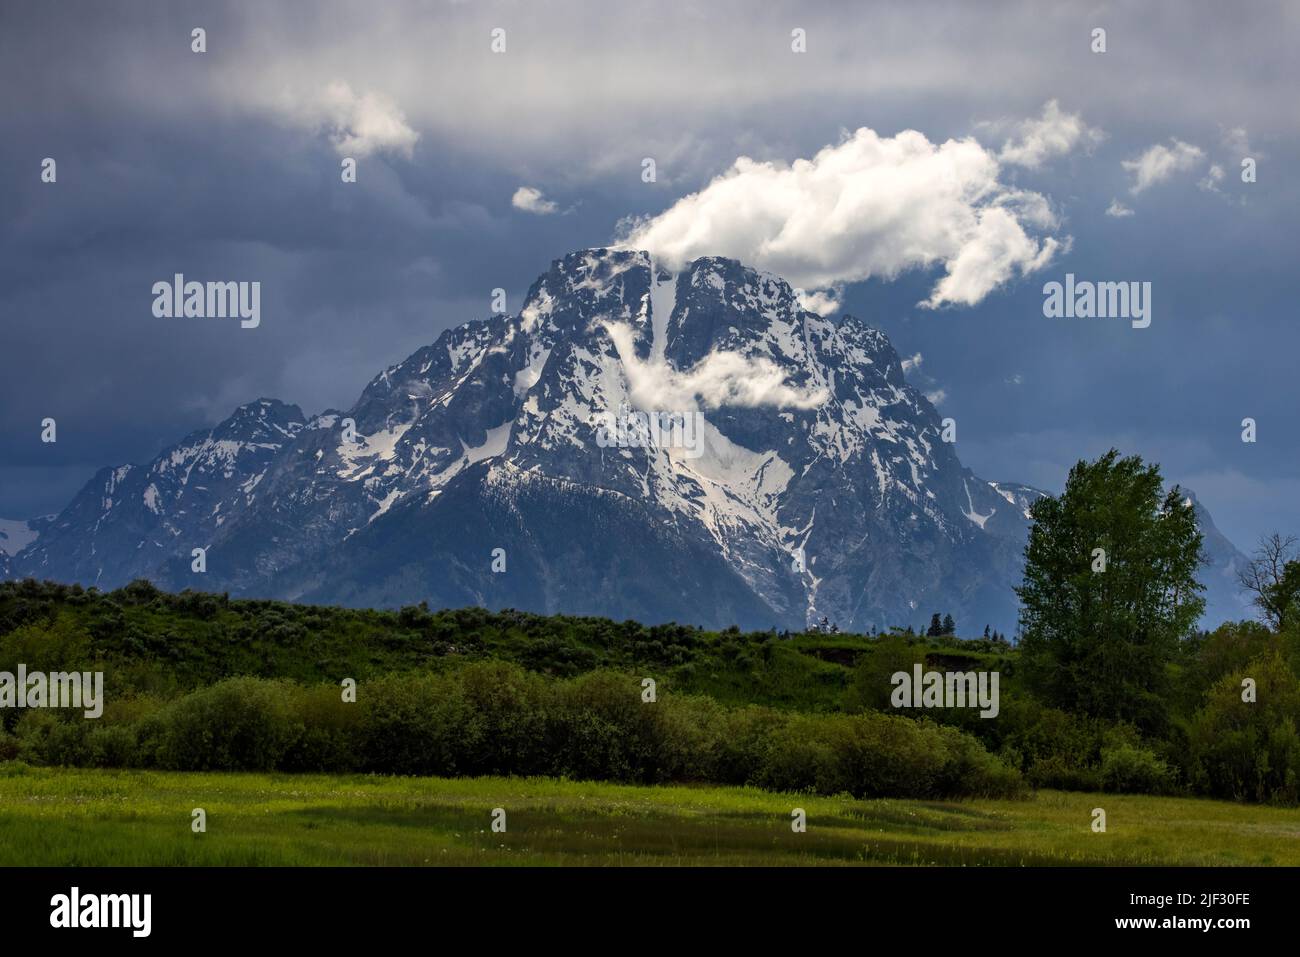 This is a view of Mount Moran, a landmark mountain on the north end of the Teton Range in Grand Teton National Park, Wyoming, USA. Stock Photo